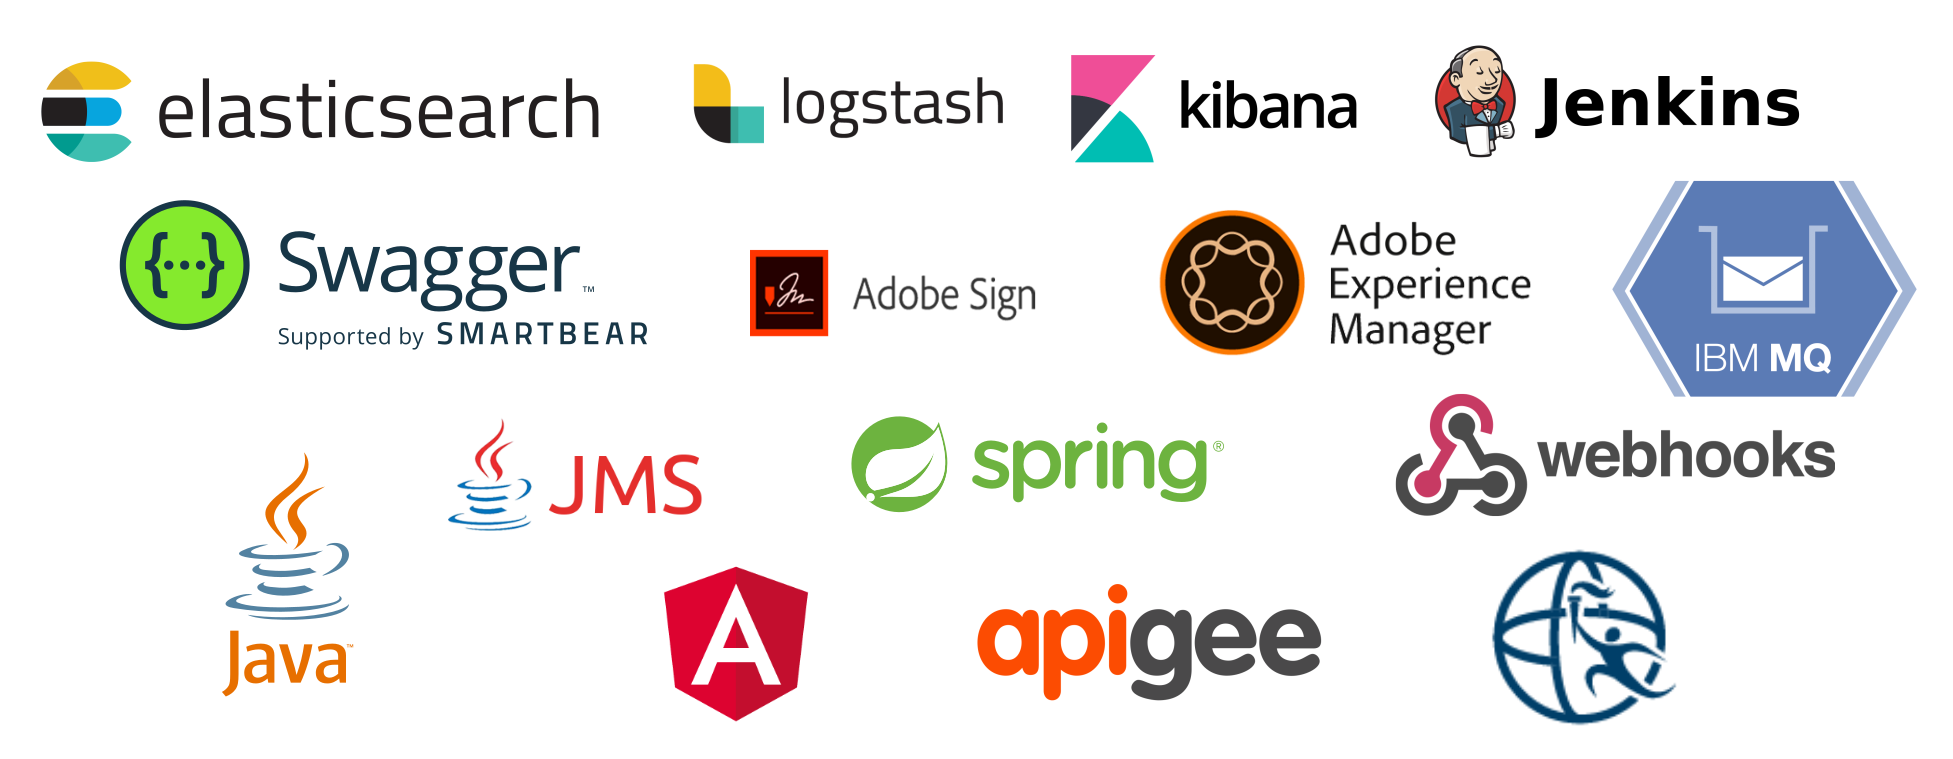 A collage of company logos related to the tech stack used.